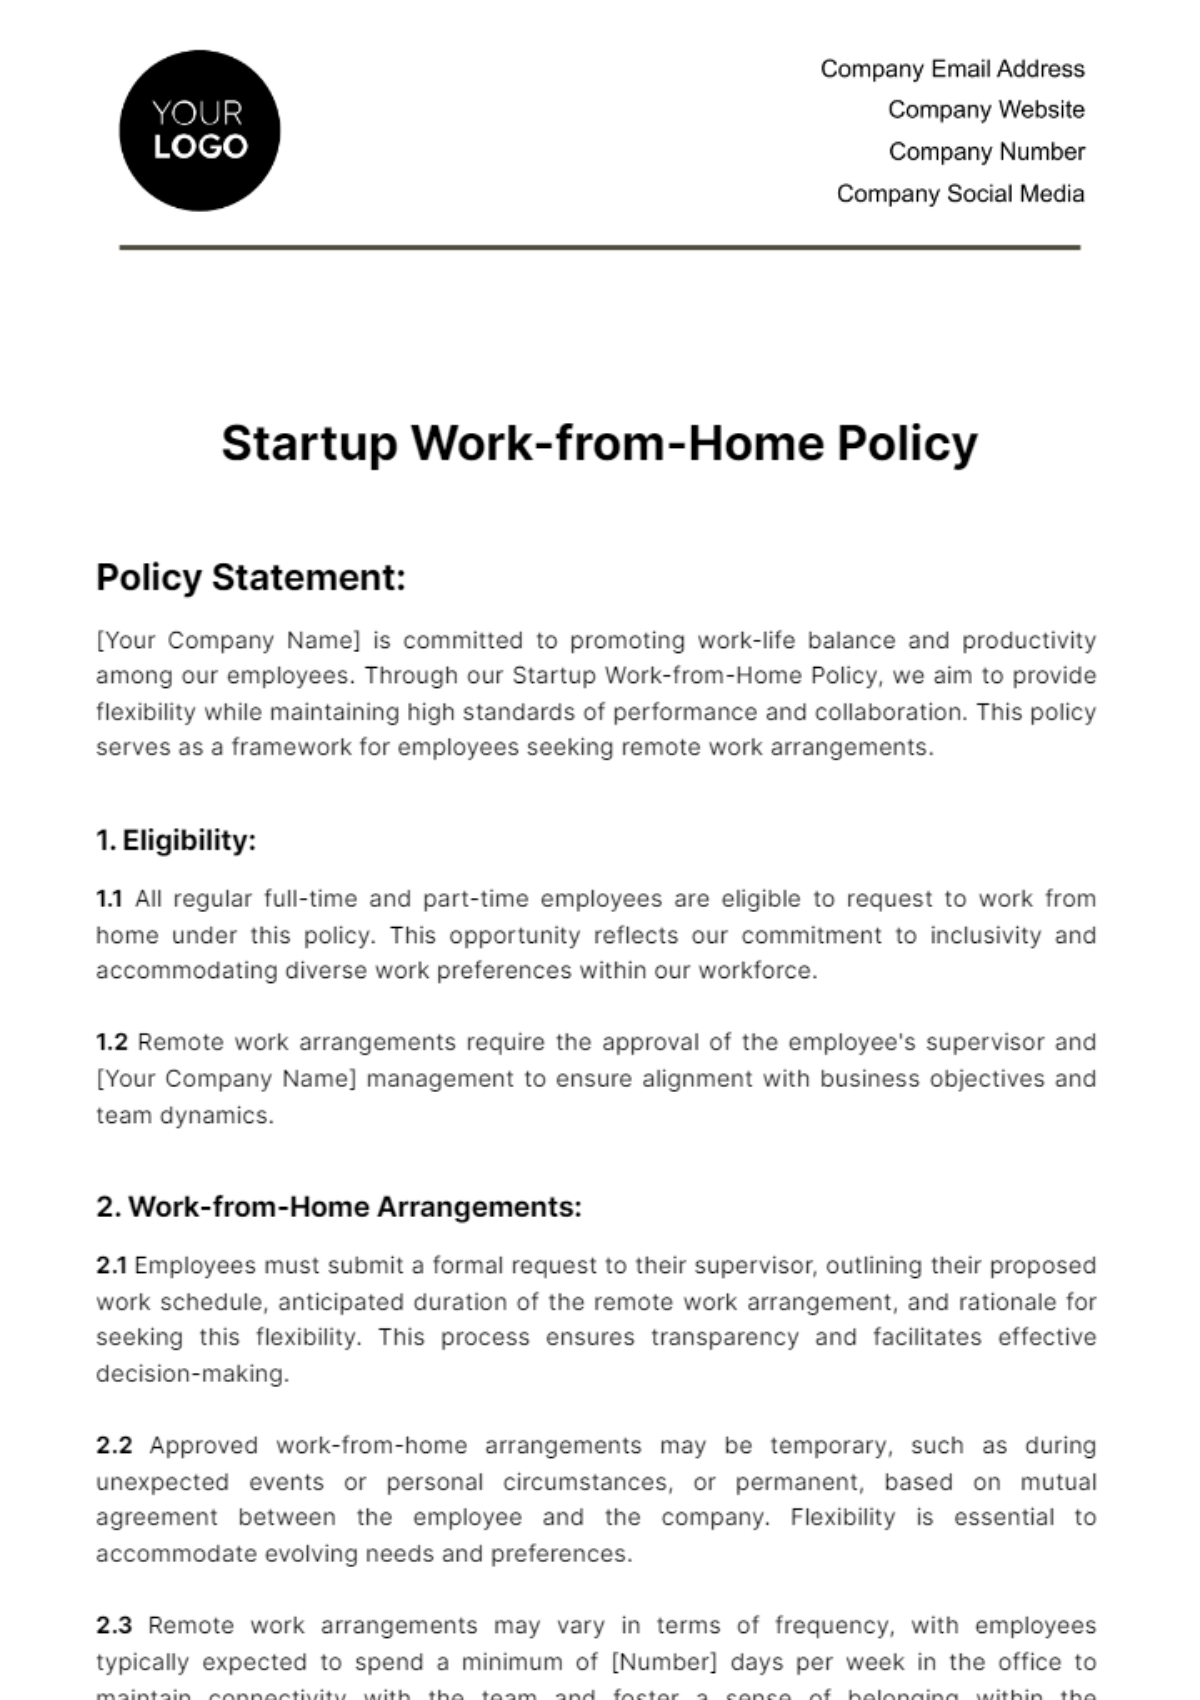 Free Startup Work-from-Home Policy Template